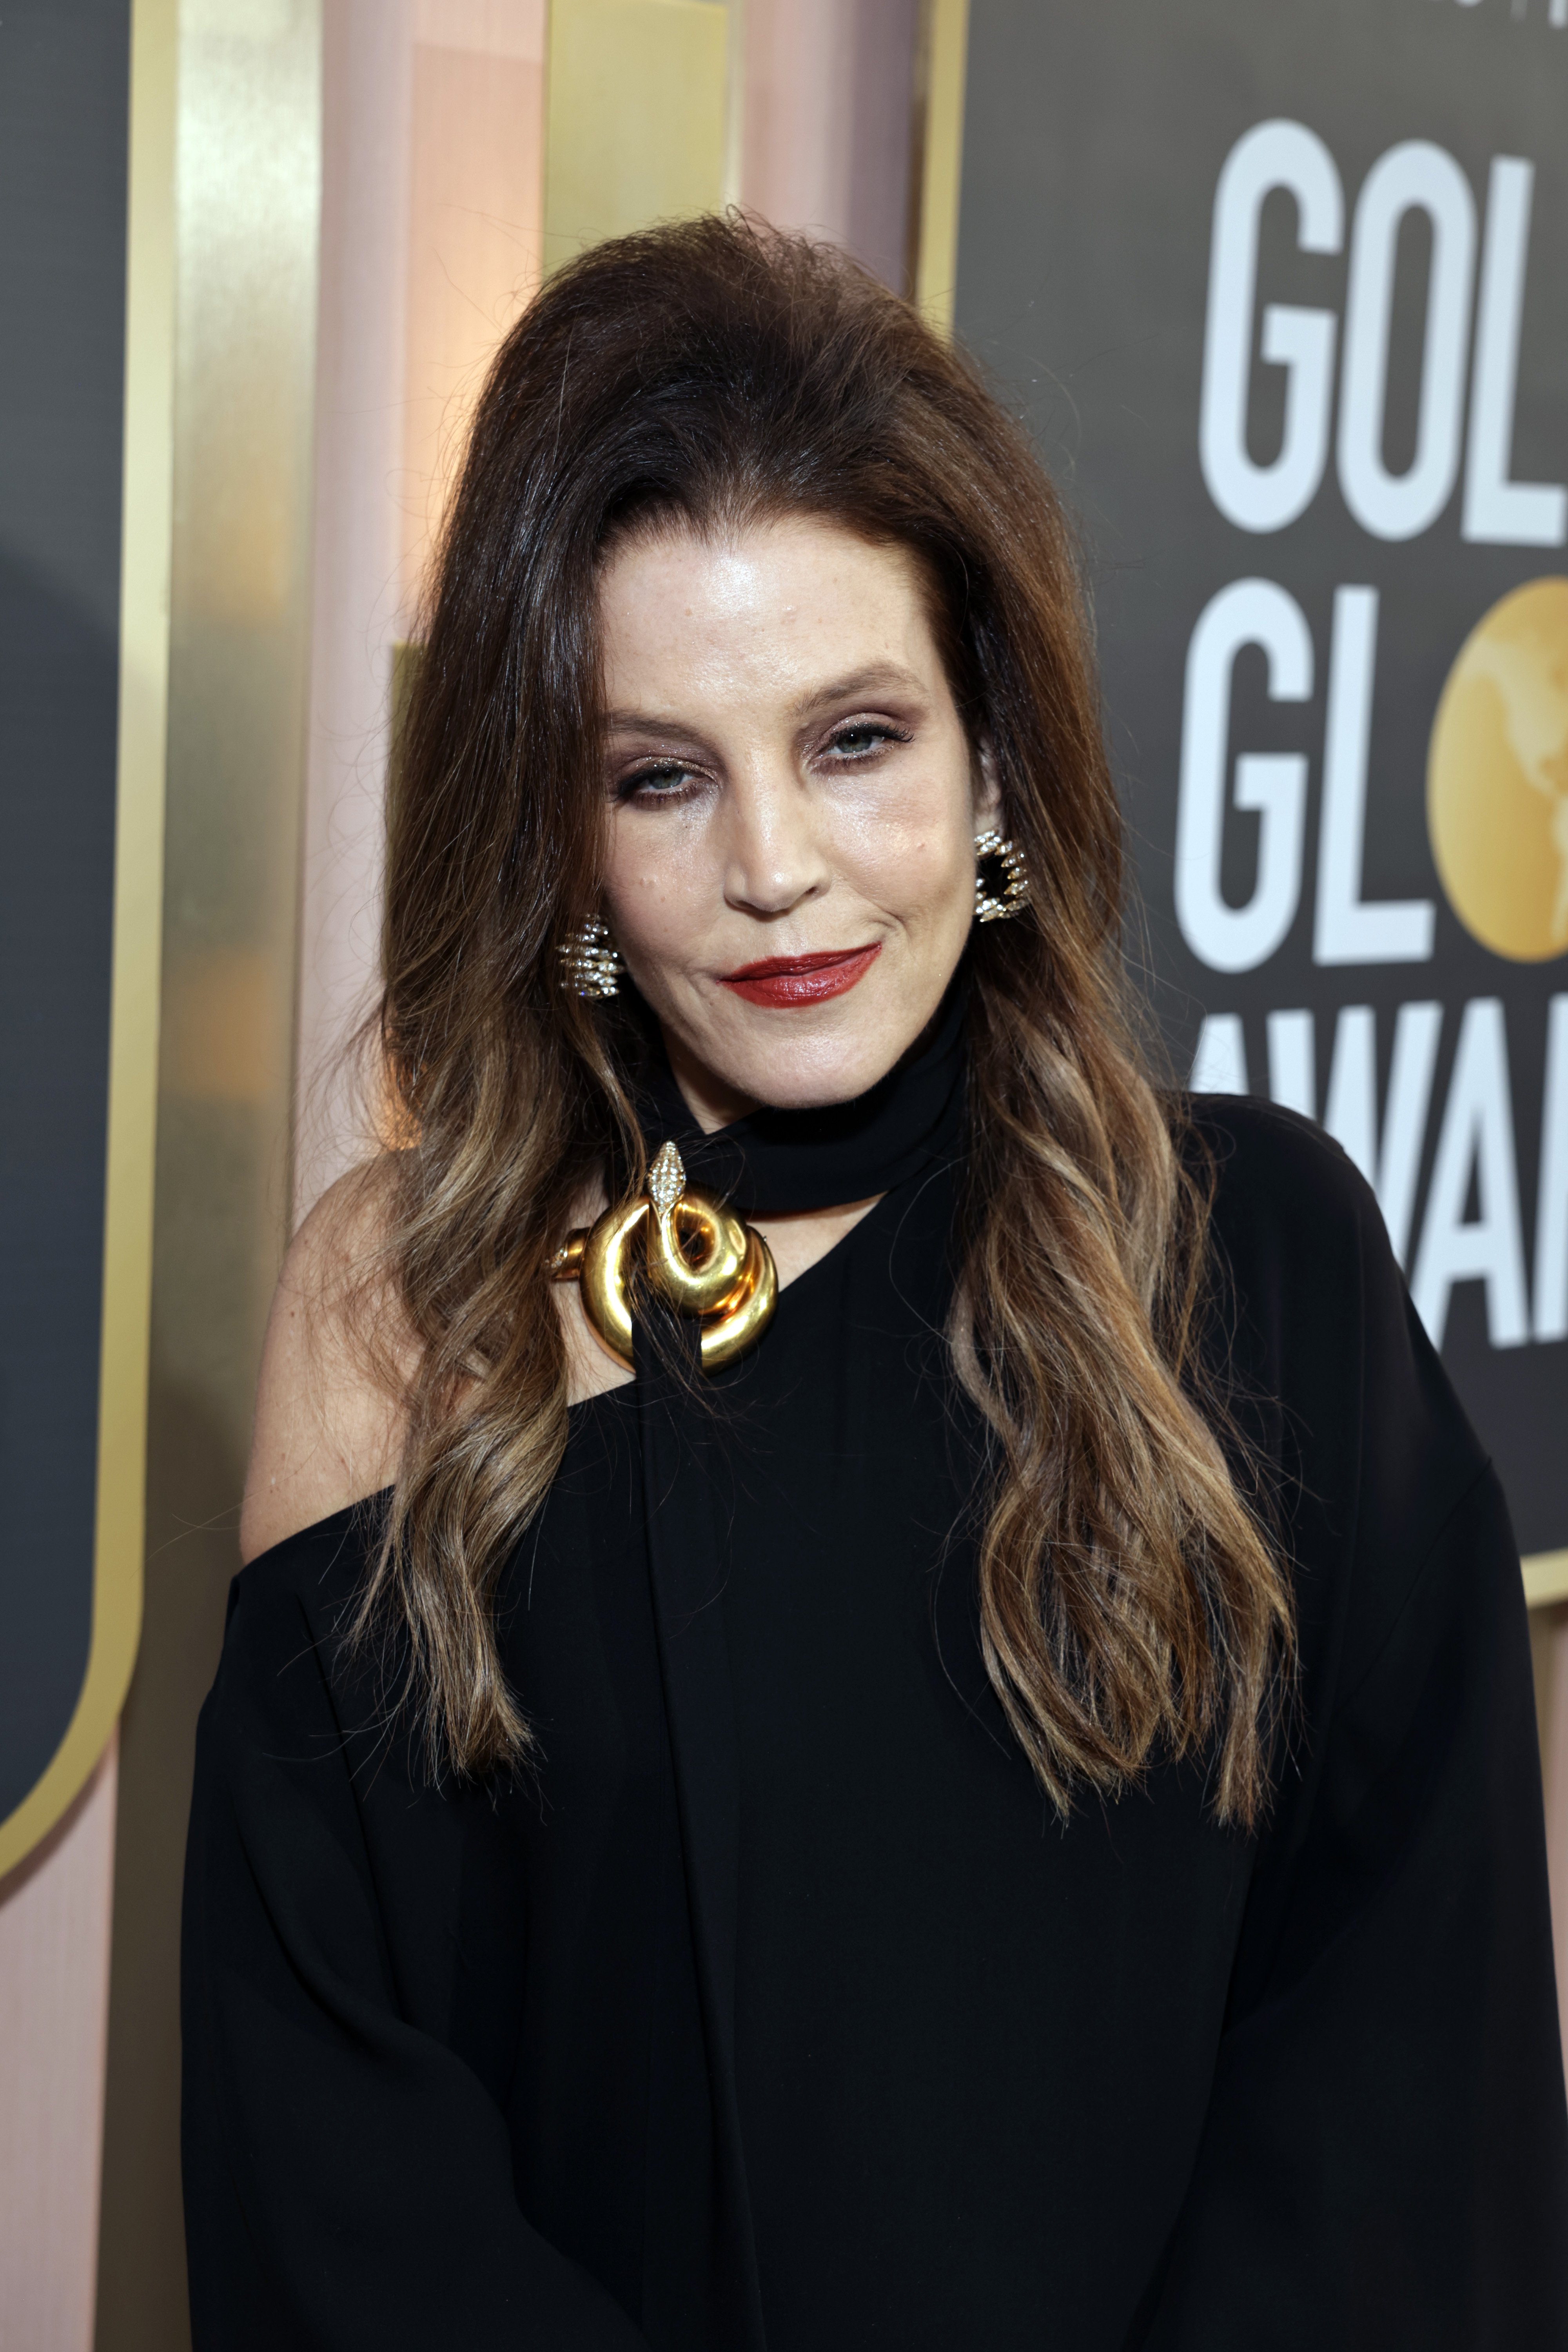 Lisa Marie Presley\\\\\\\\\\\\\\\\u00a0at the 80th Annual Golden Globe Awards\\\\\\\\\\\\\\\\u00a0on January 10, 2023, in Beverly Hills, California | Source: Getty Images